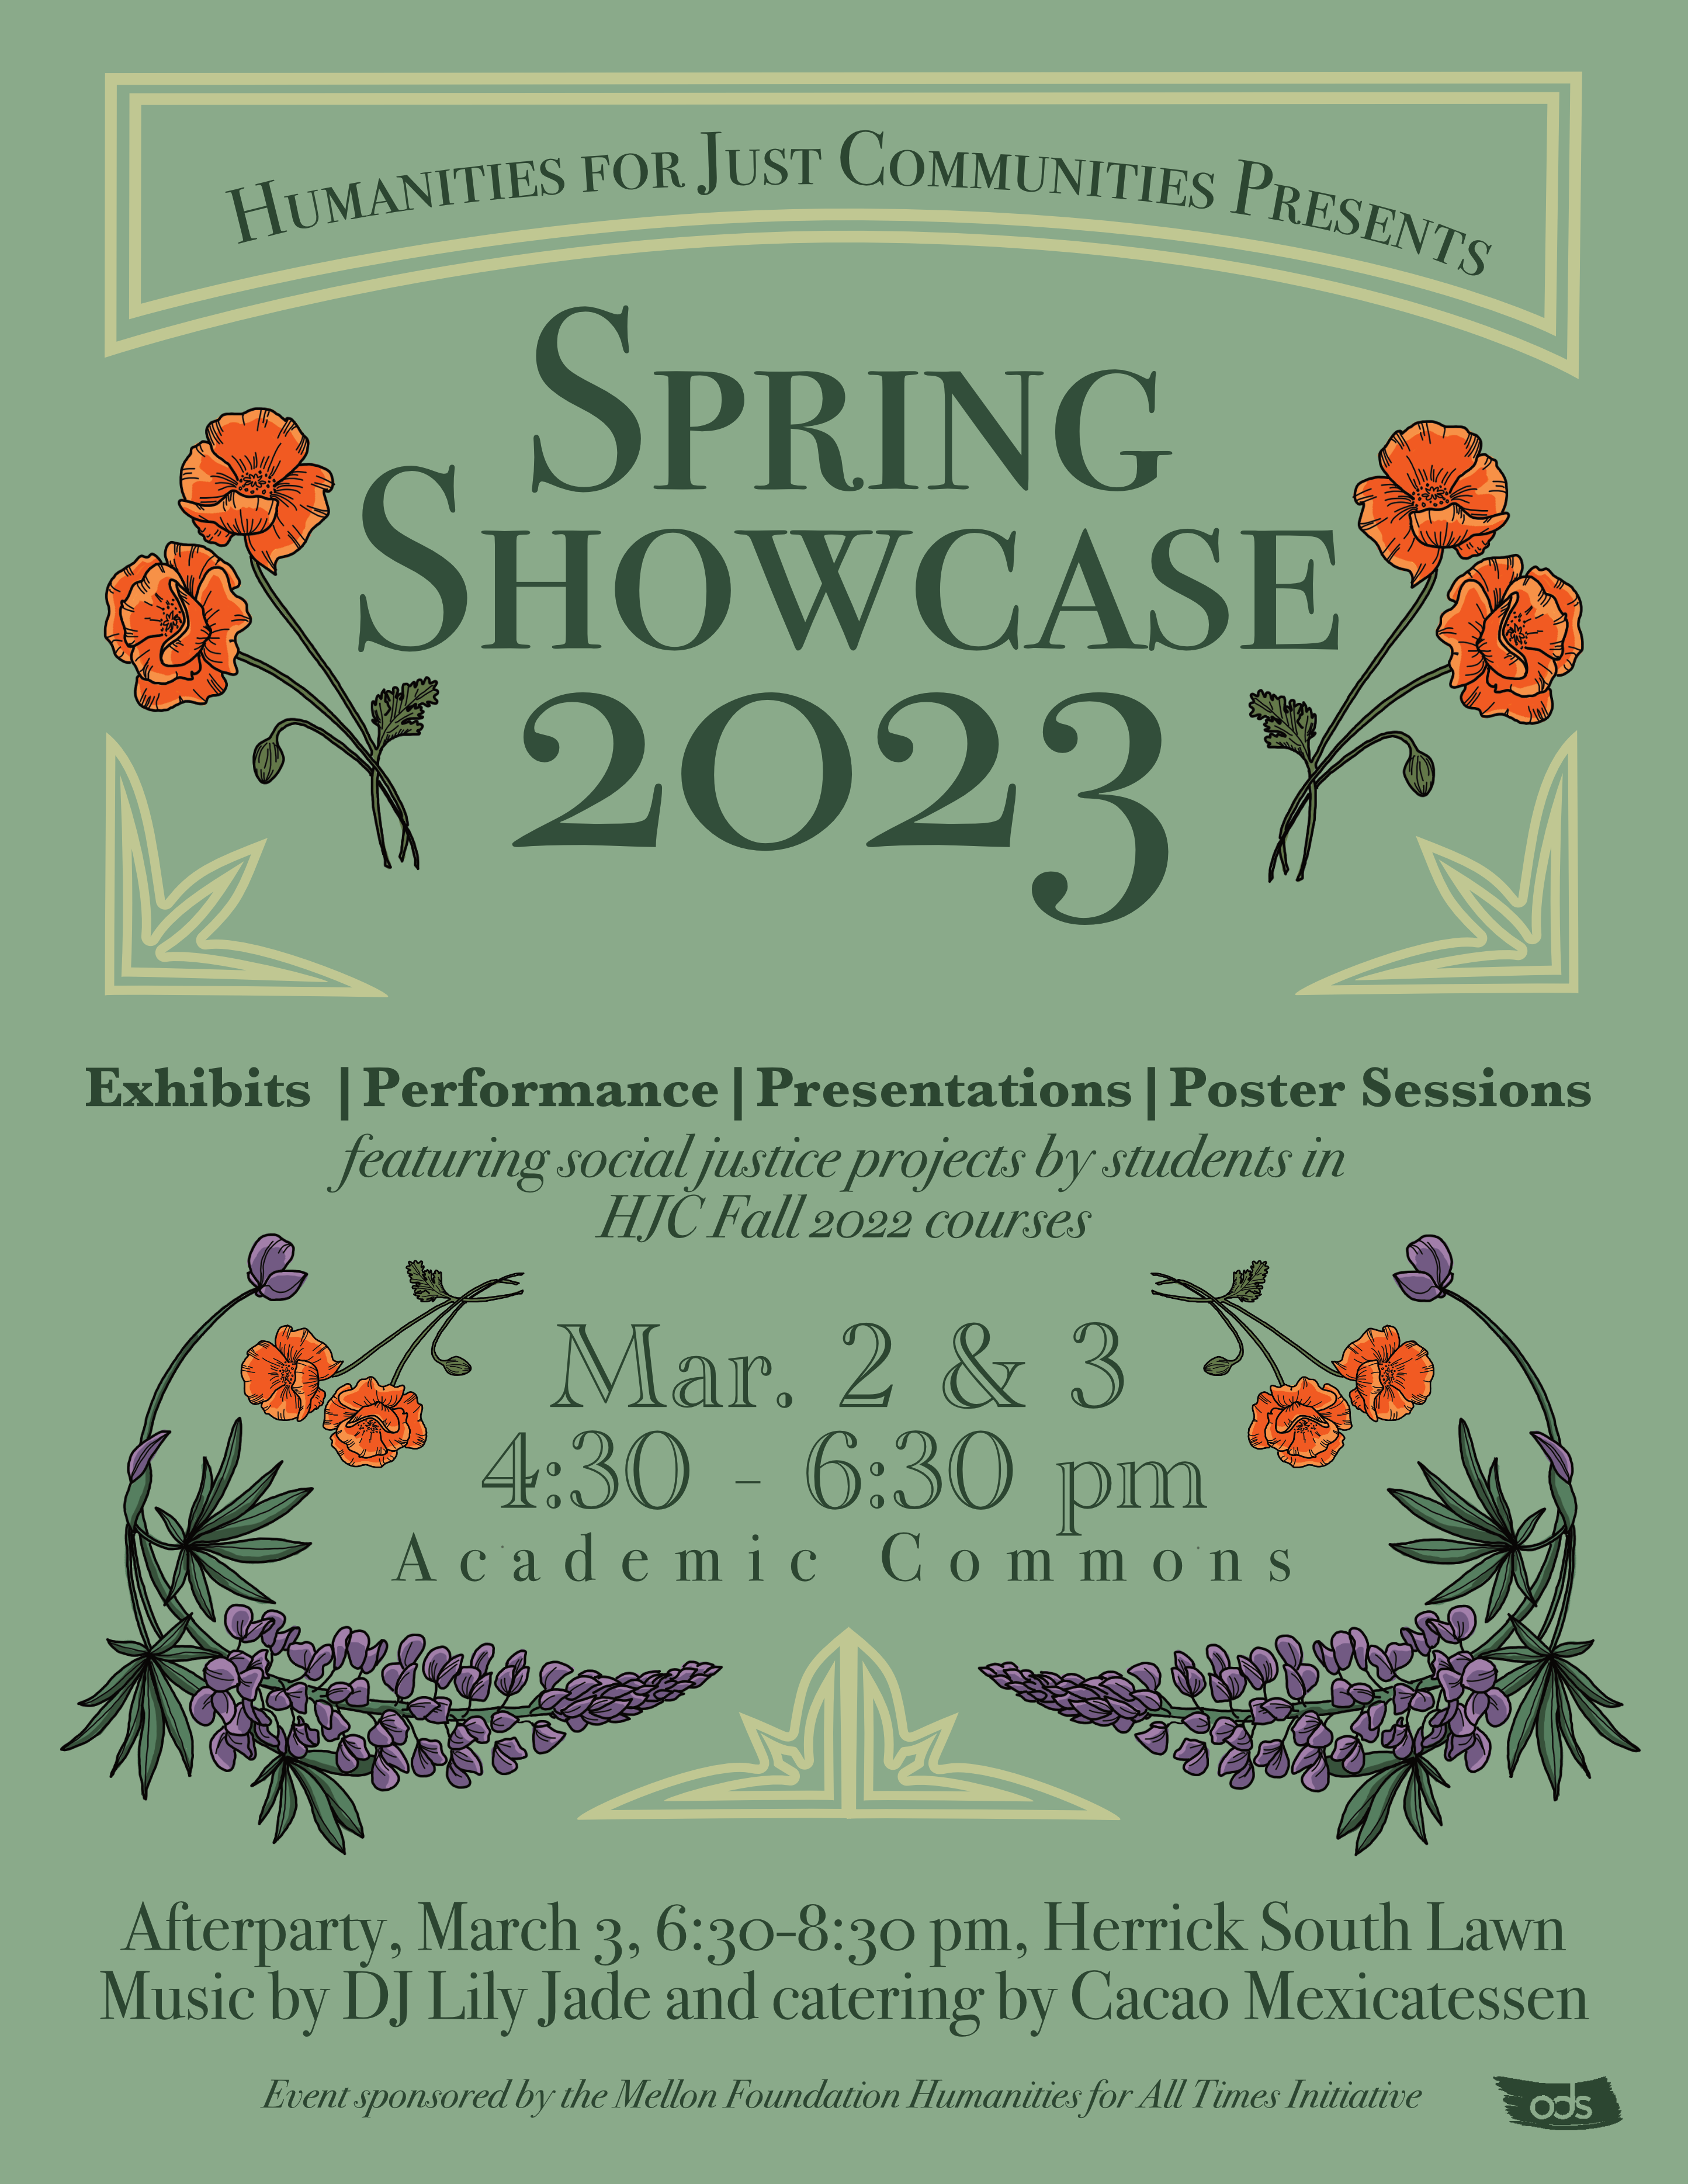 Humanities for Just Communities Presents Spring Showcase 2023